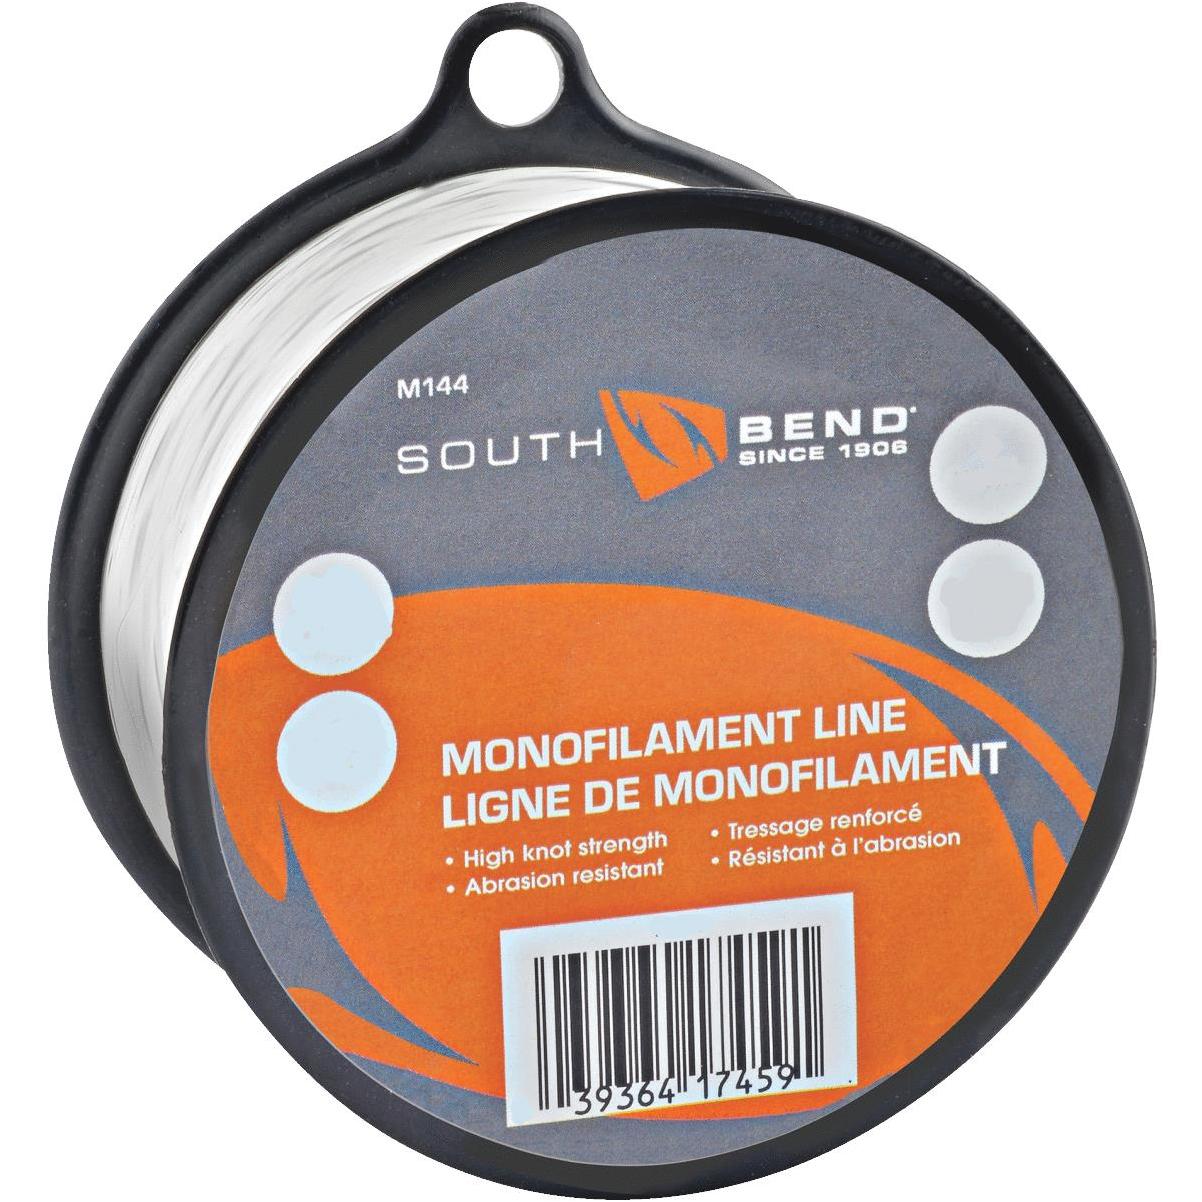 SouthBend 4 Lb. 1125 Yd. Clear Monofilament Fishing Line